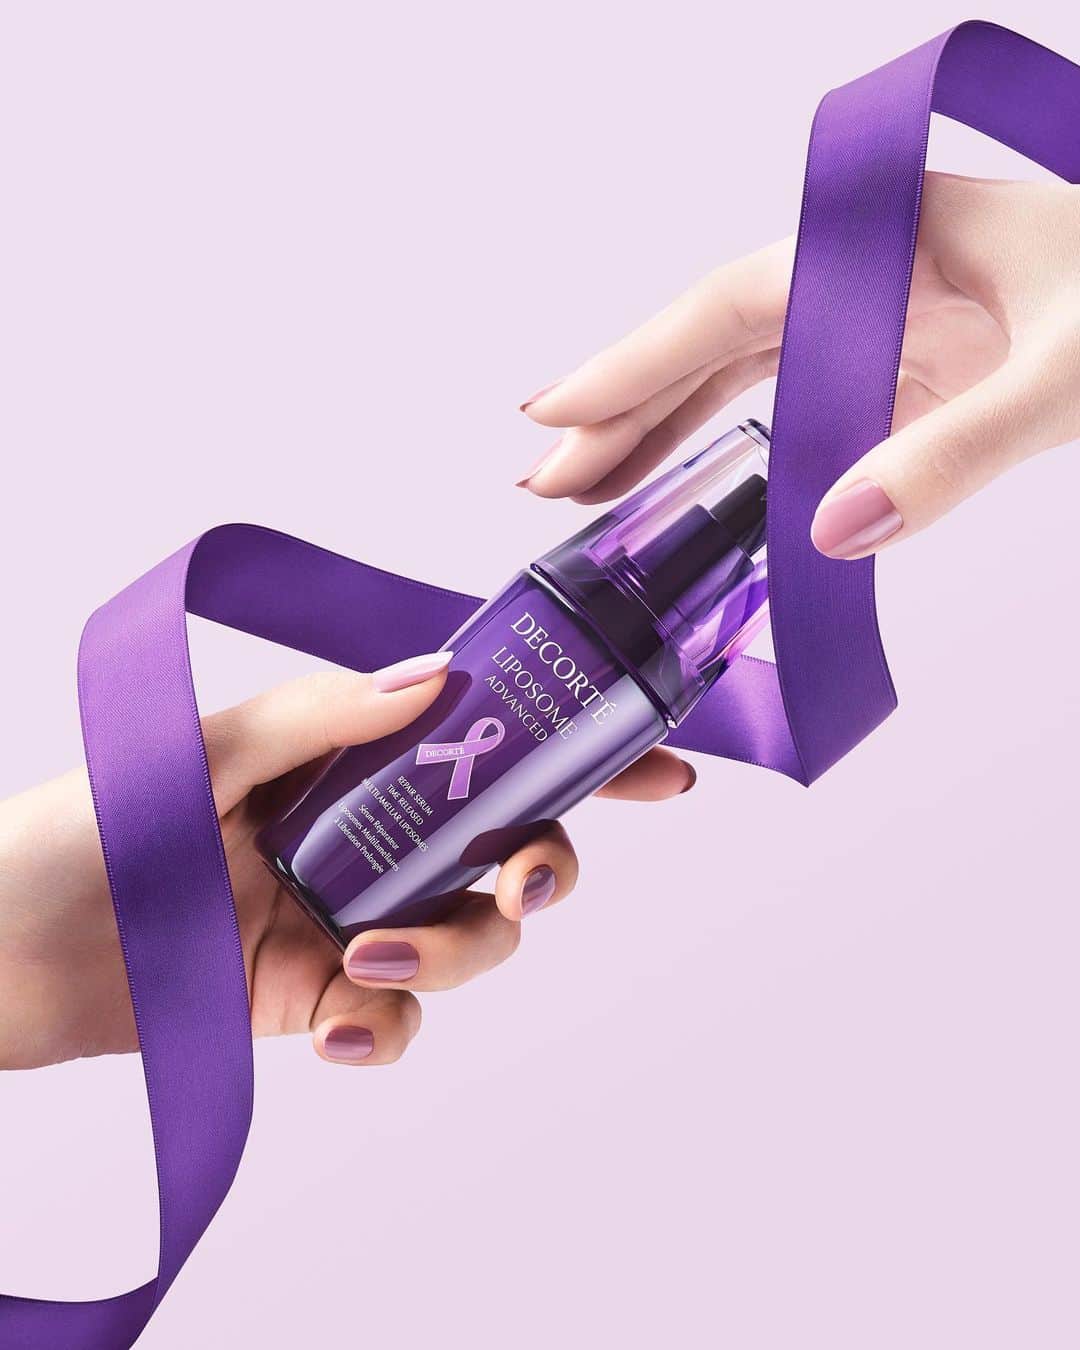 DECORTÉのインスタグラム：「Limited edition “Liposome Advanced Purple Ribbon Set” is available again this year.   Through the Purple Ribbon Project, DECORTÉ will help as many women as possible and contribute to creating a society where they can live as themselves with peace of mind and body.  今年も「リポソーム アドバンスト パープルリボン セット」が限定で登場。  コスメデコルテは、パープルリボンプロジェクトを通じて一人でも多くの女性が救われ、心身ともに安心して、自分らしく生きることのできる社会の実現に貢献します。  11月1日発売　限定品 リポソーム アドバンスト パープルリボン セット 2023 ※数に限りがございますので、品切れの際はご容赦ください。  #decorte #コスメデコルテ #purpleribbonproject #パープルリボンプロジェクト#リポソームアドバンストリペアセラム #リポソーム #リポソーム美容液」